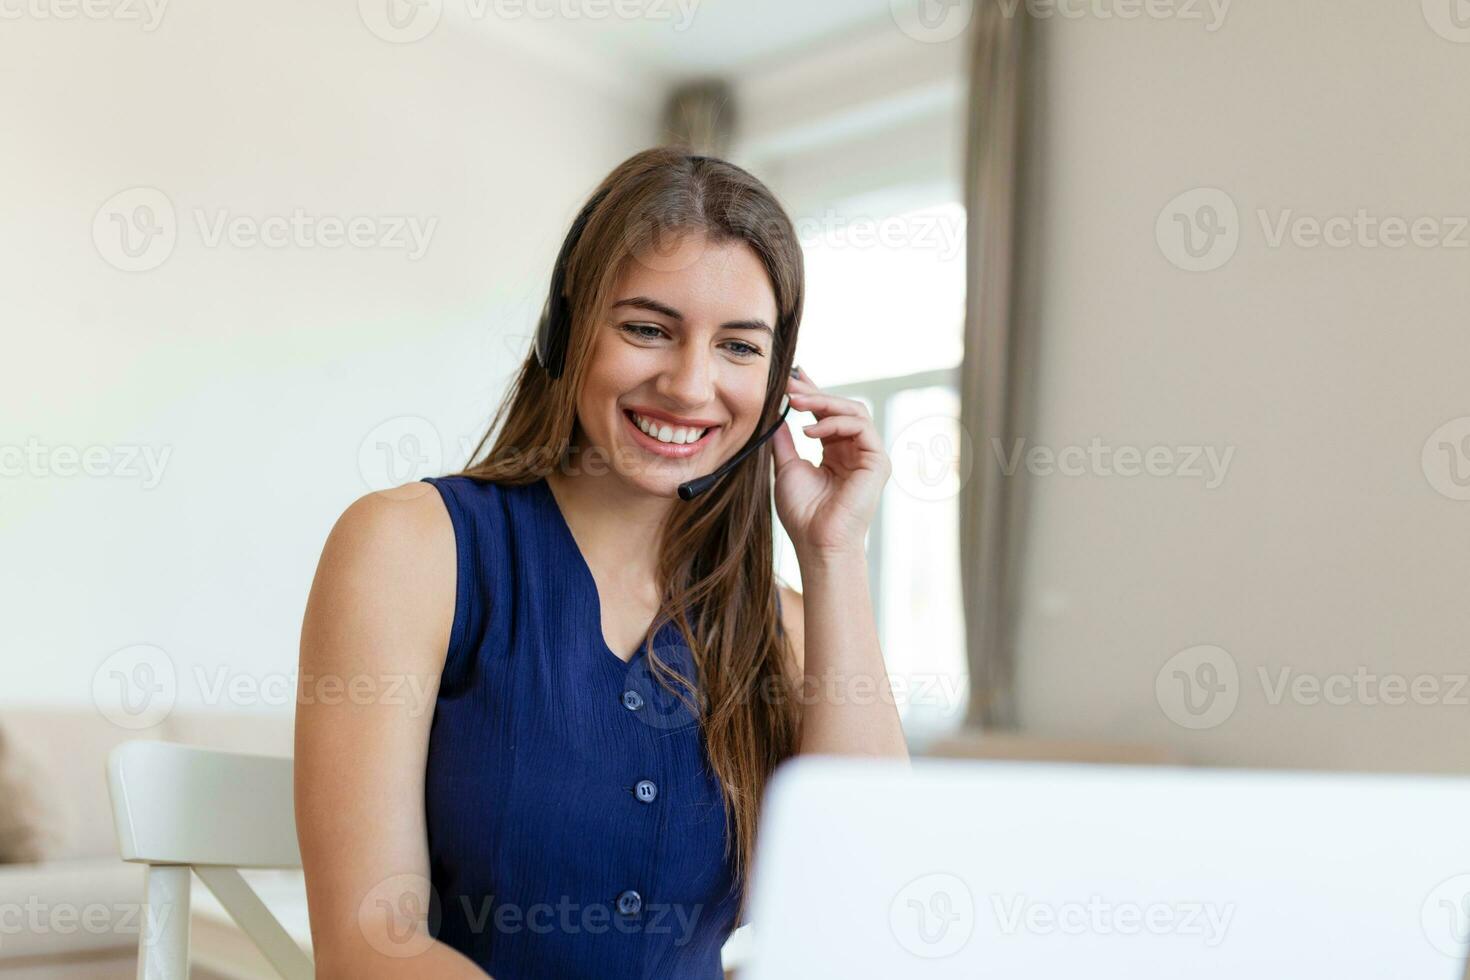 Happy young woman in headphones speaking looking at laptop making notes, business woman talking by video conference call, Conference by webcam, online training, e-coaching concept photo